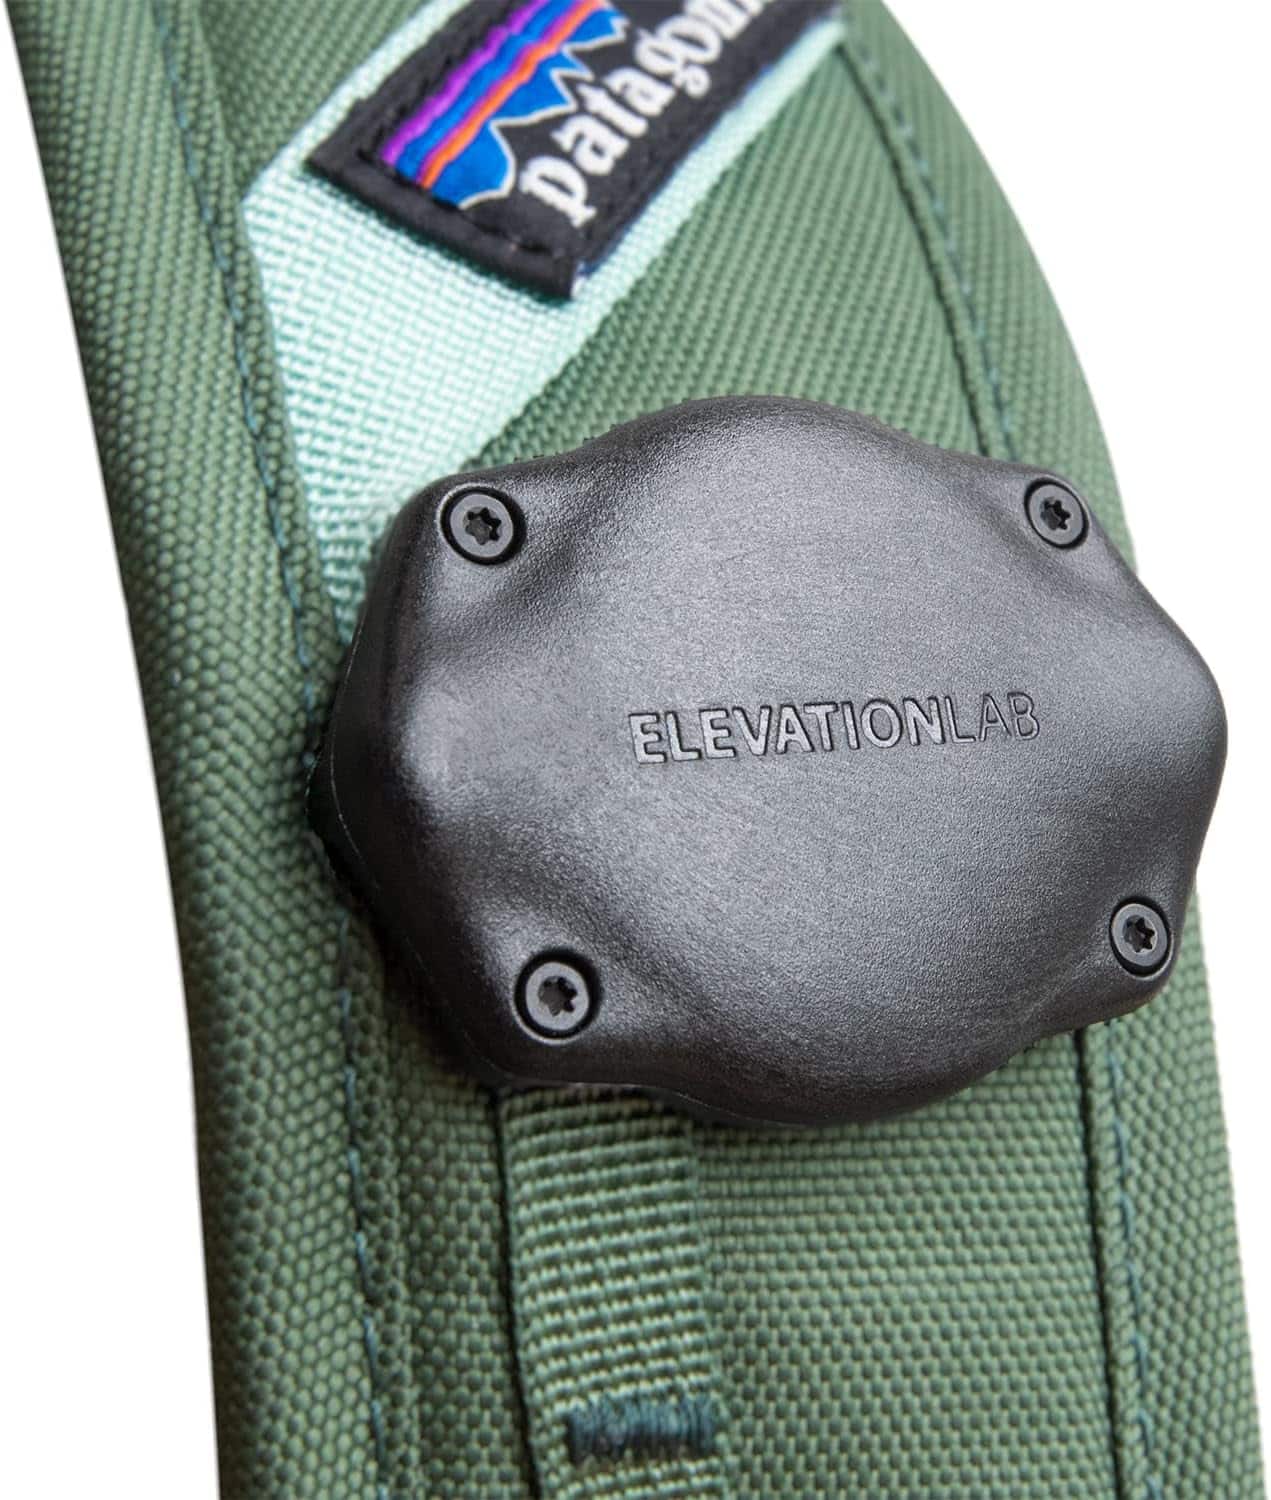 TagVault – The Ultimate AirTag Strap Mount: A Waterproof and Discreet Solution for Security